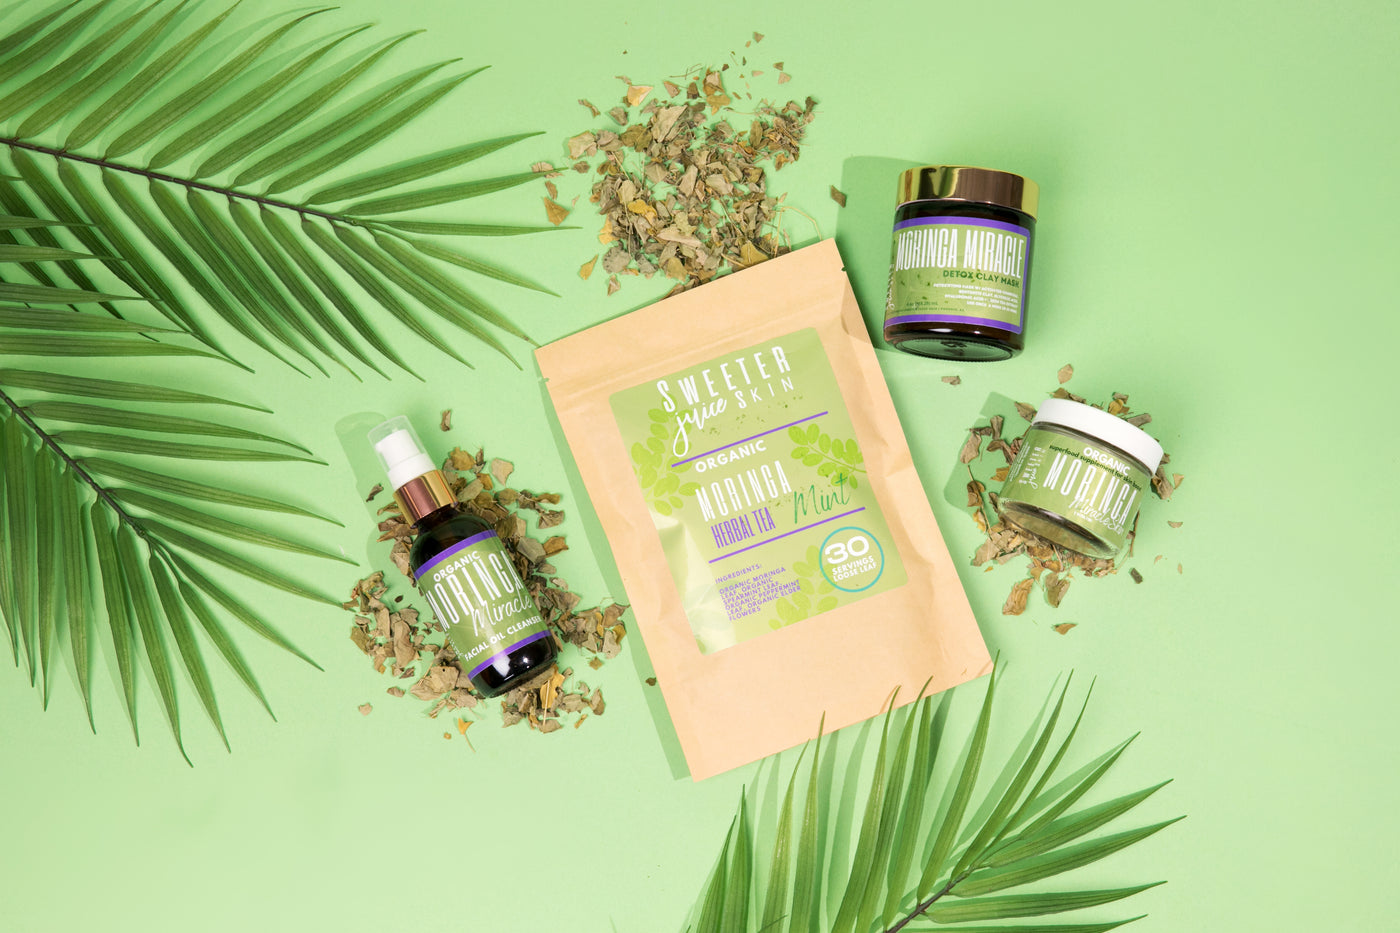 Moringa Miracle Inner + Outer Beauty System by Sweeter Juice Skin